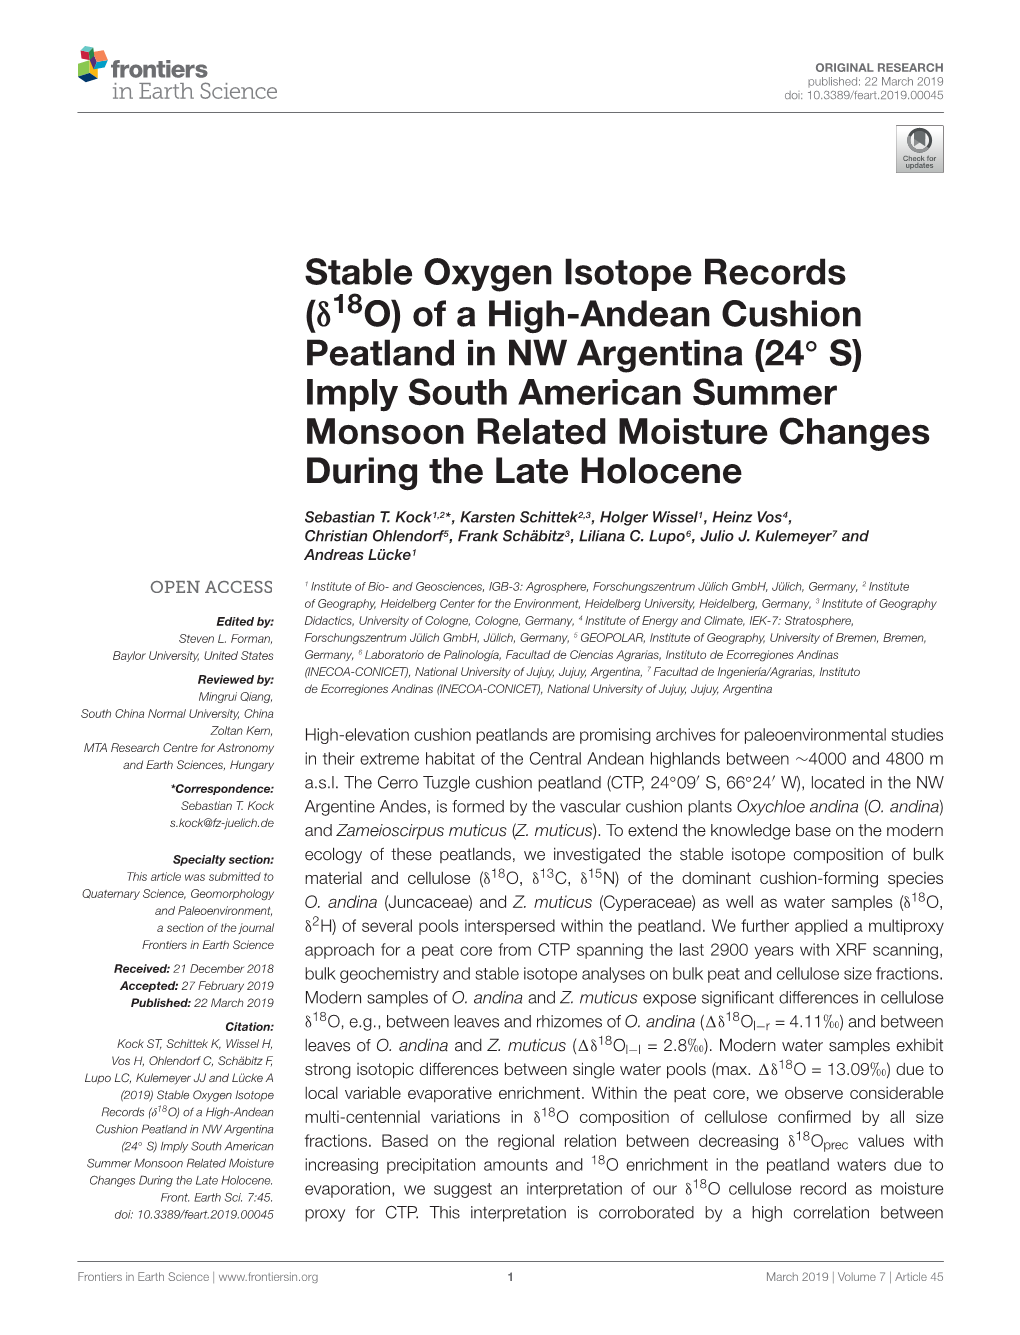 Stable Oxygen Isotope Records (Δ18o)